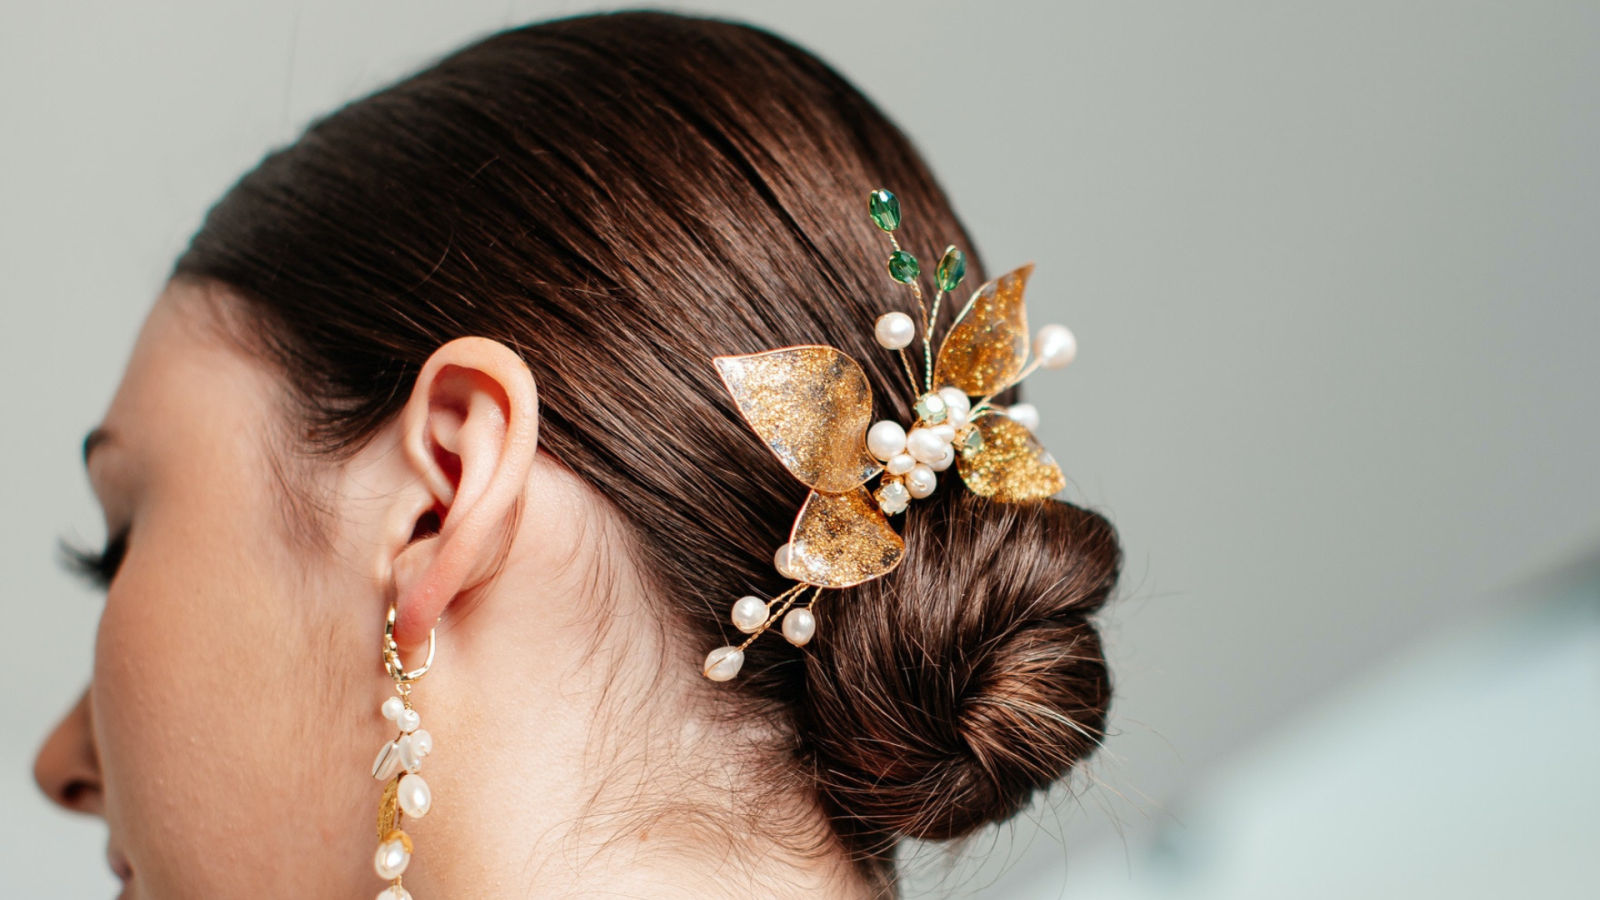 Exquisite hair accessories to elevate your festive look